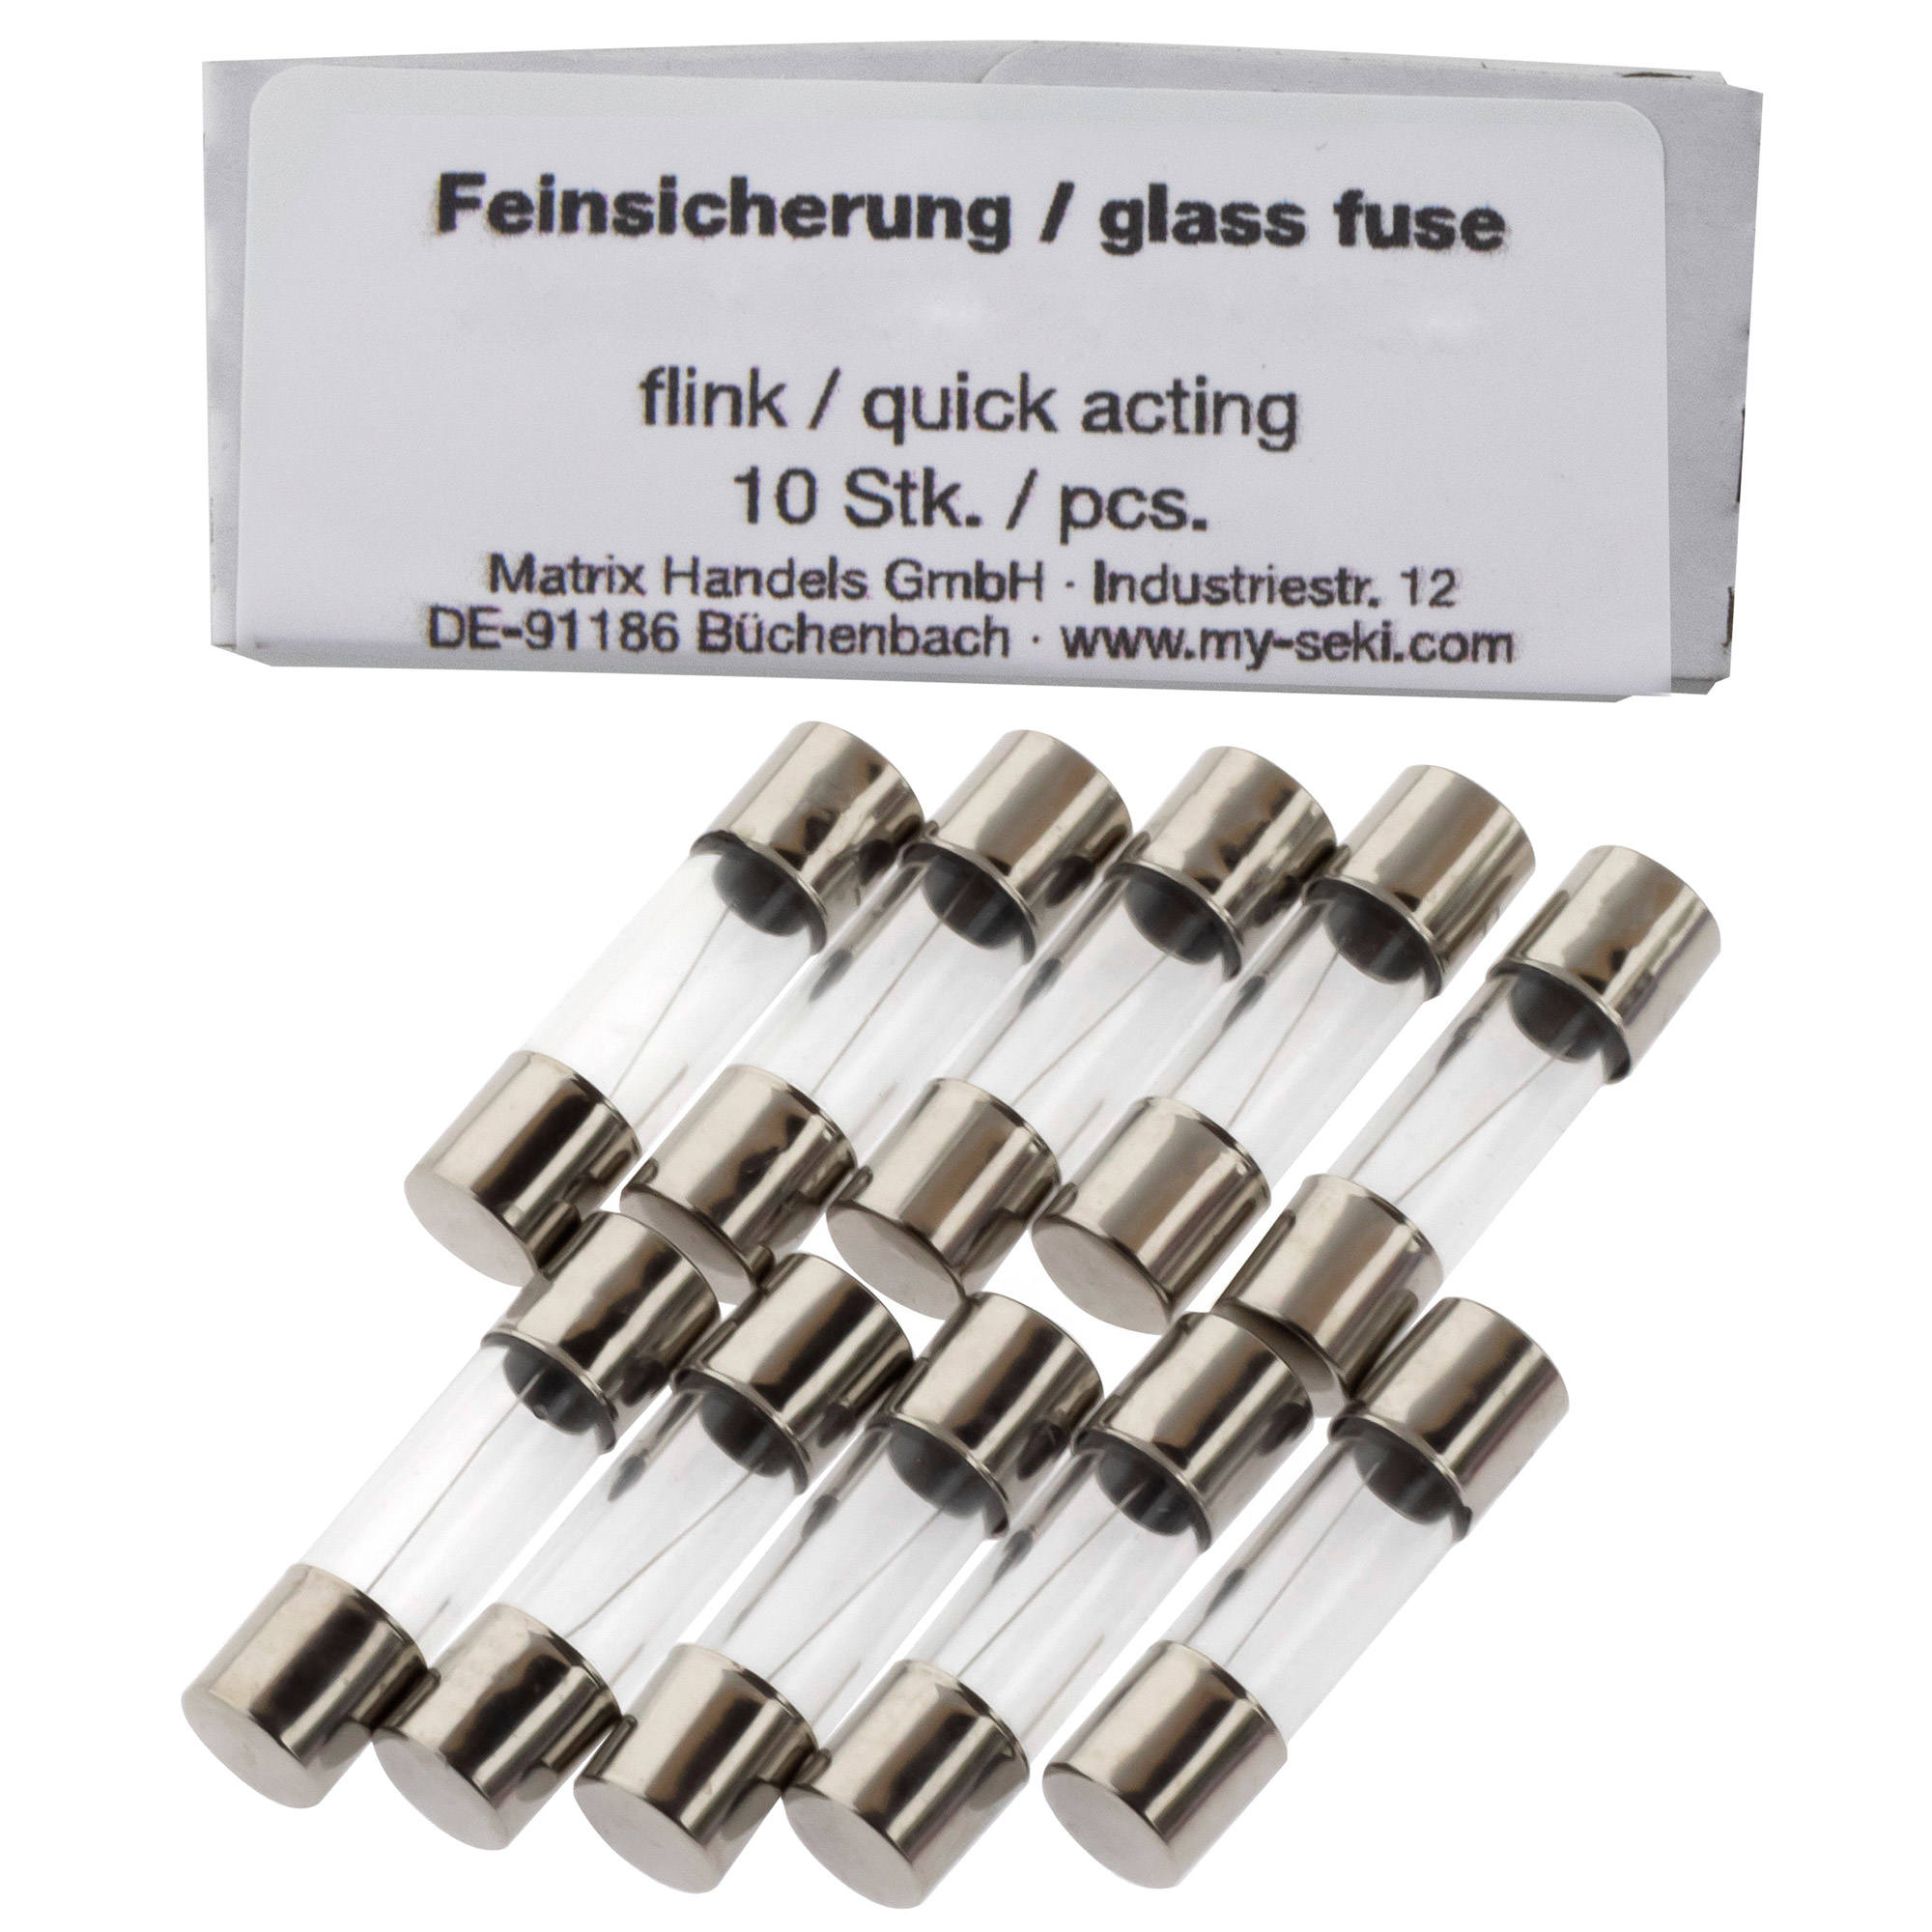 Micro Fuse 0,16A (160mA), 5x20mm, quick acting